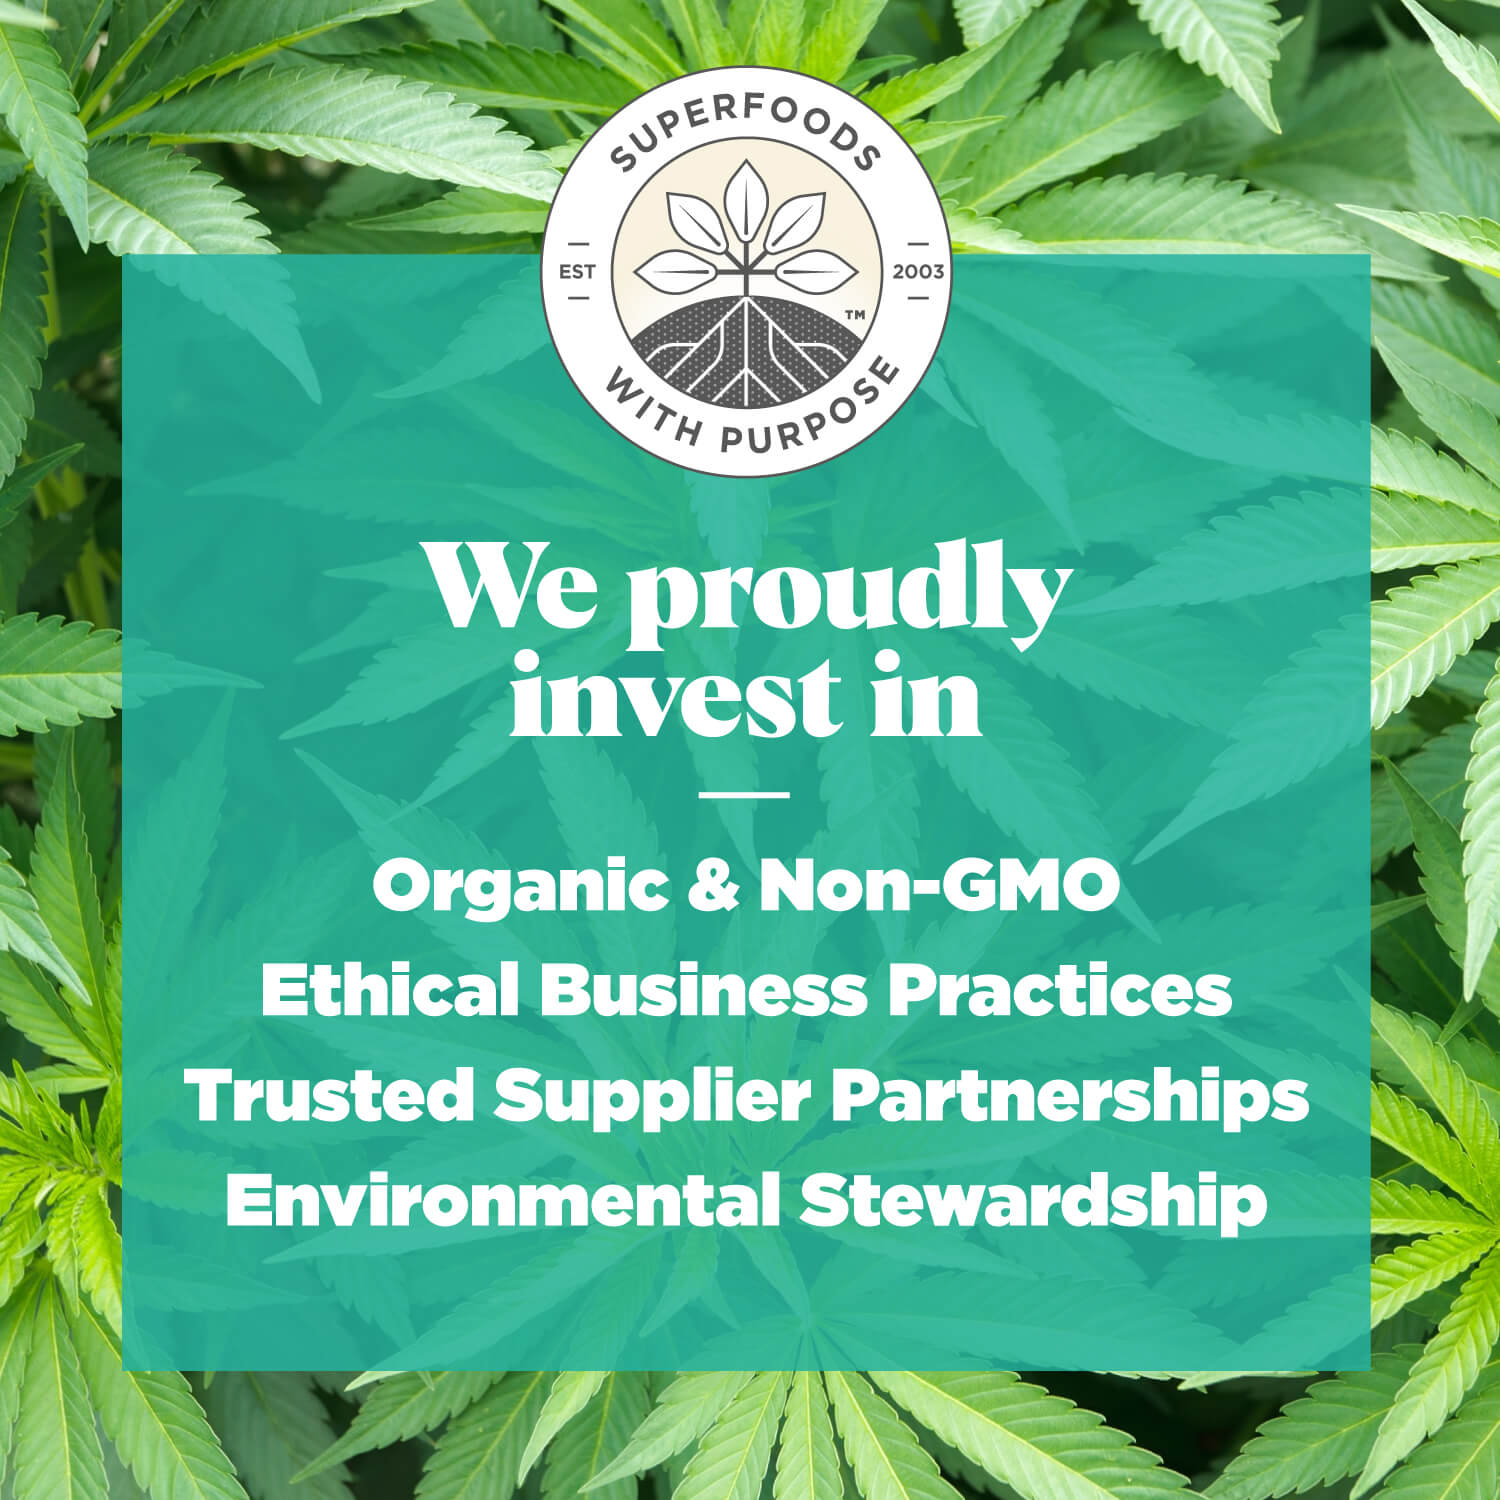 Navitas Organics proudly invests in organic and non-GMO, ethical business practices, trusted supplier partnerships, and environmental stewardship.